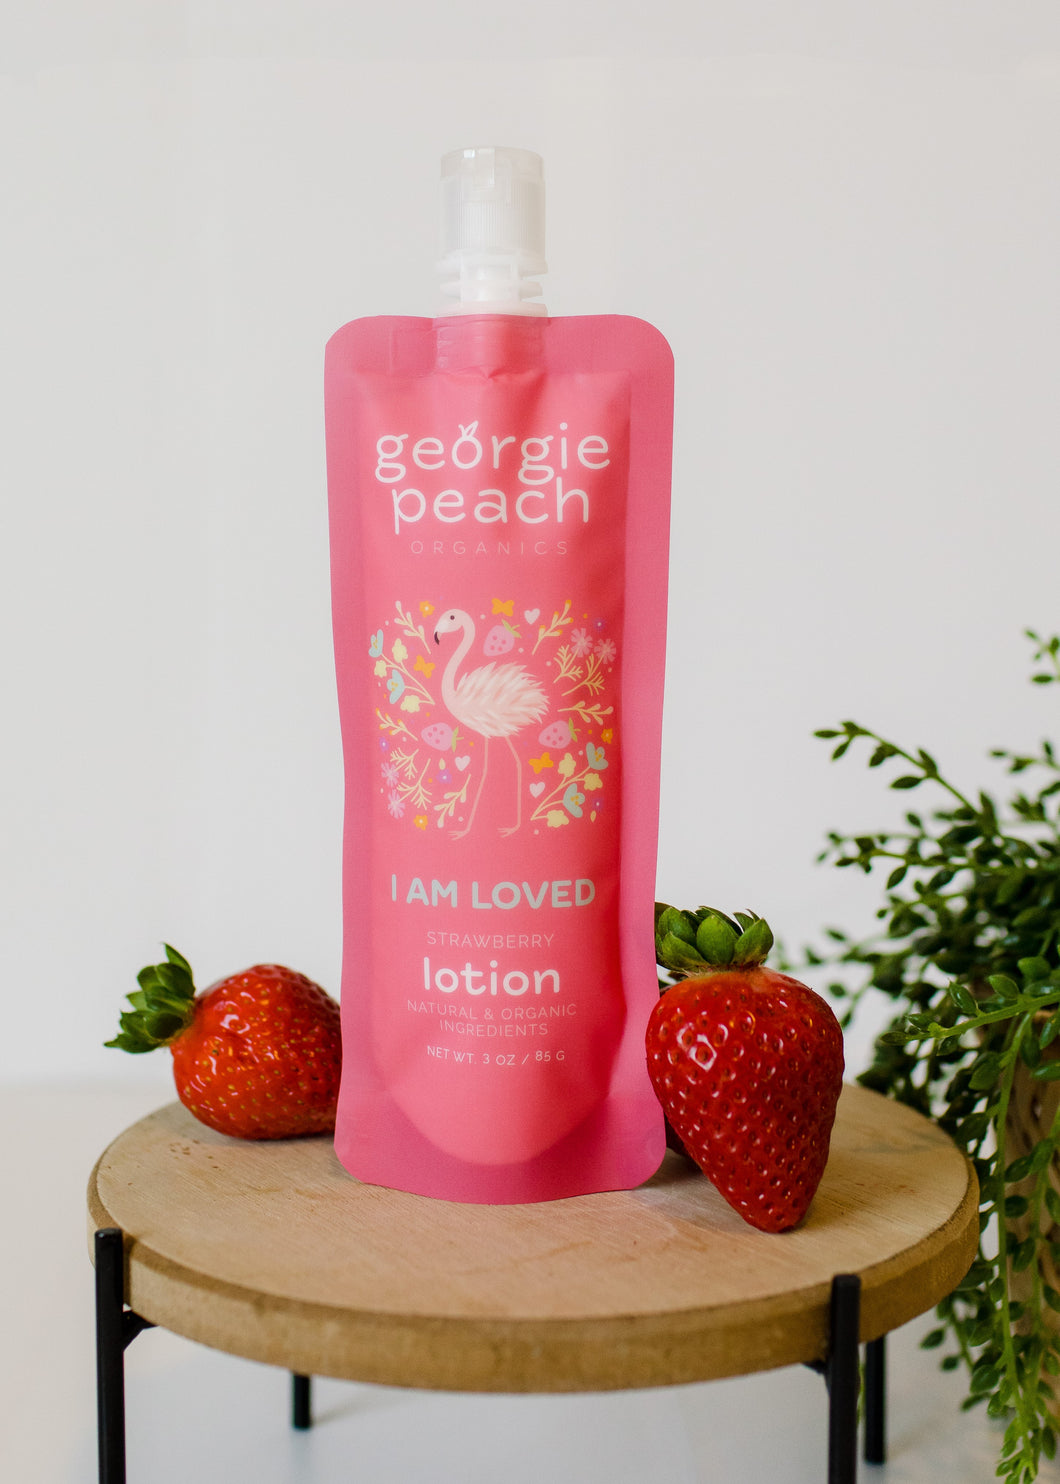 I AM LOVED : Strawberry Lotion